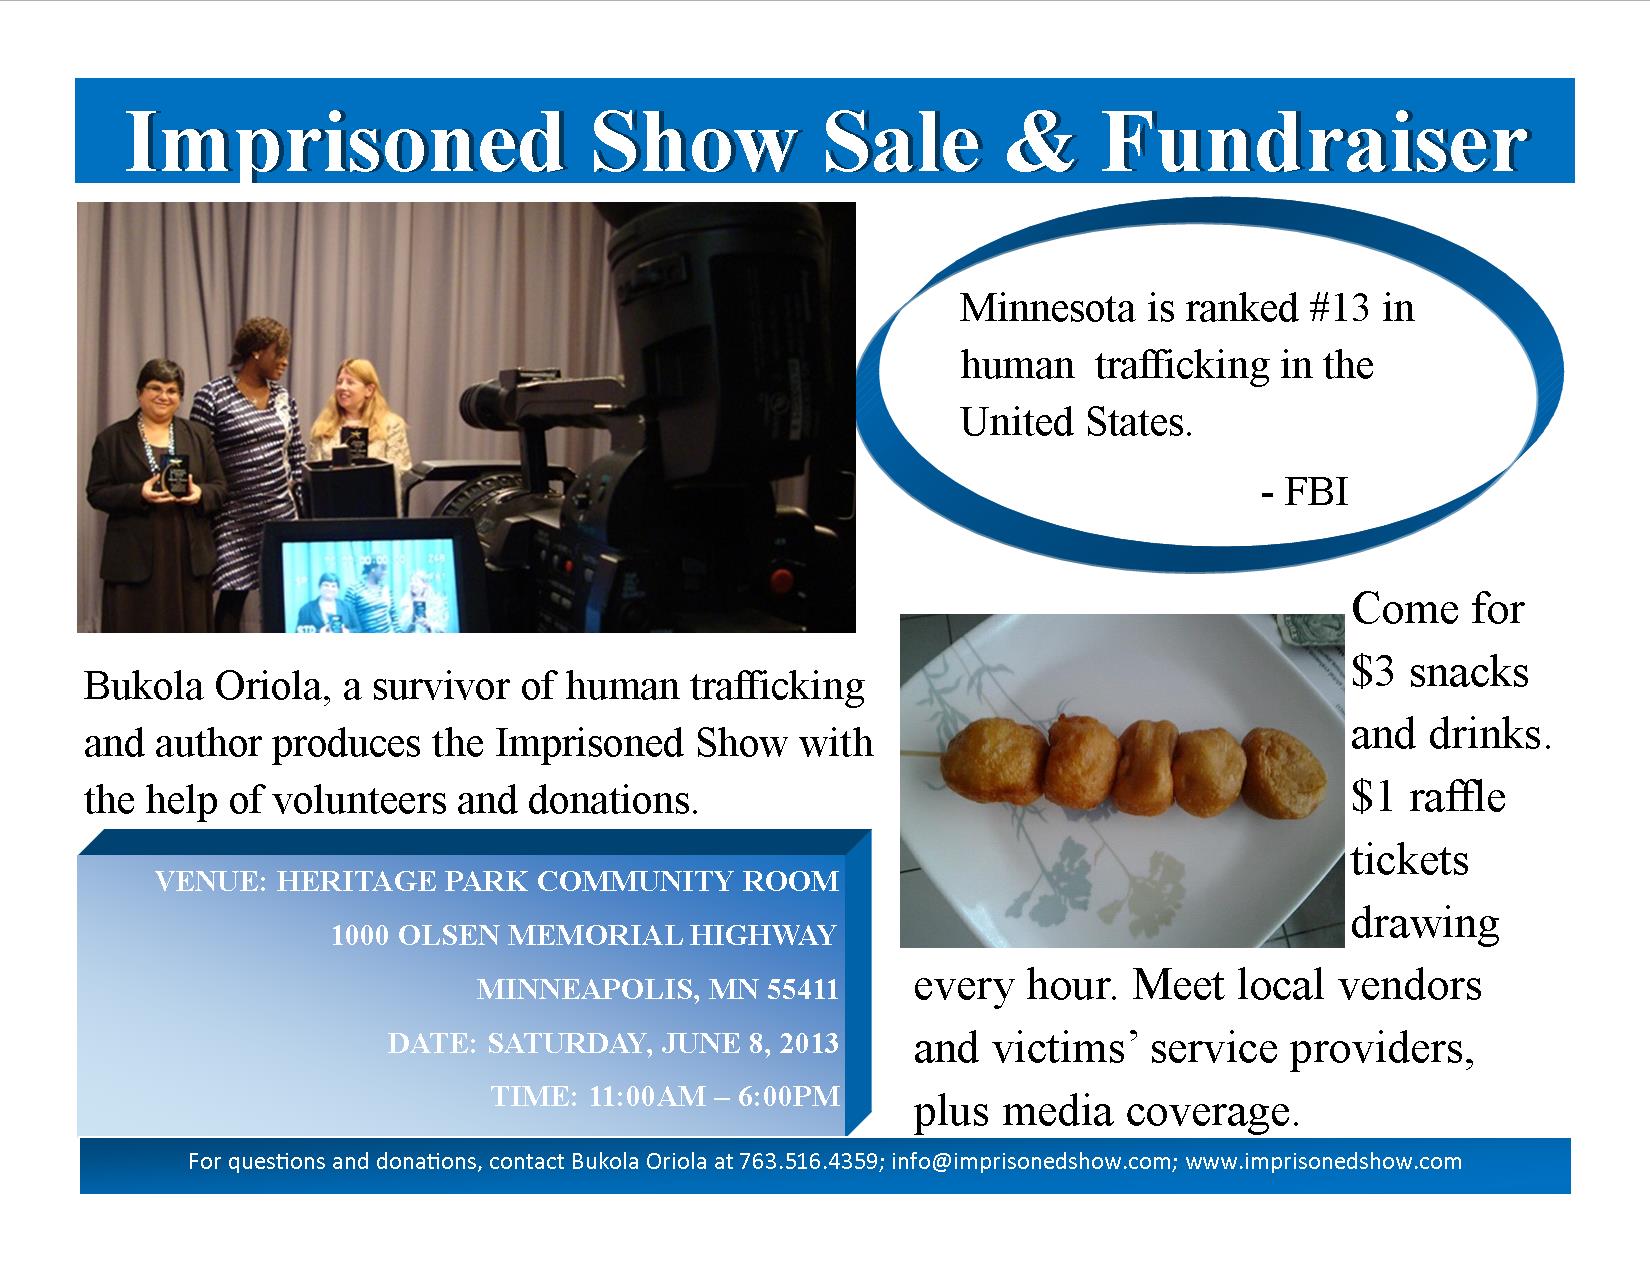 Imprisoned Show Sale and Fundraiser Event